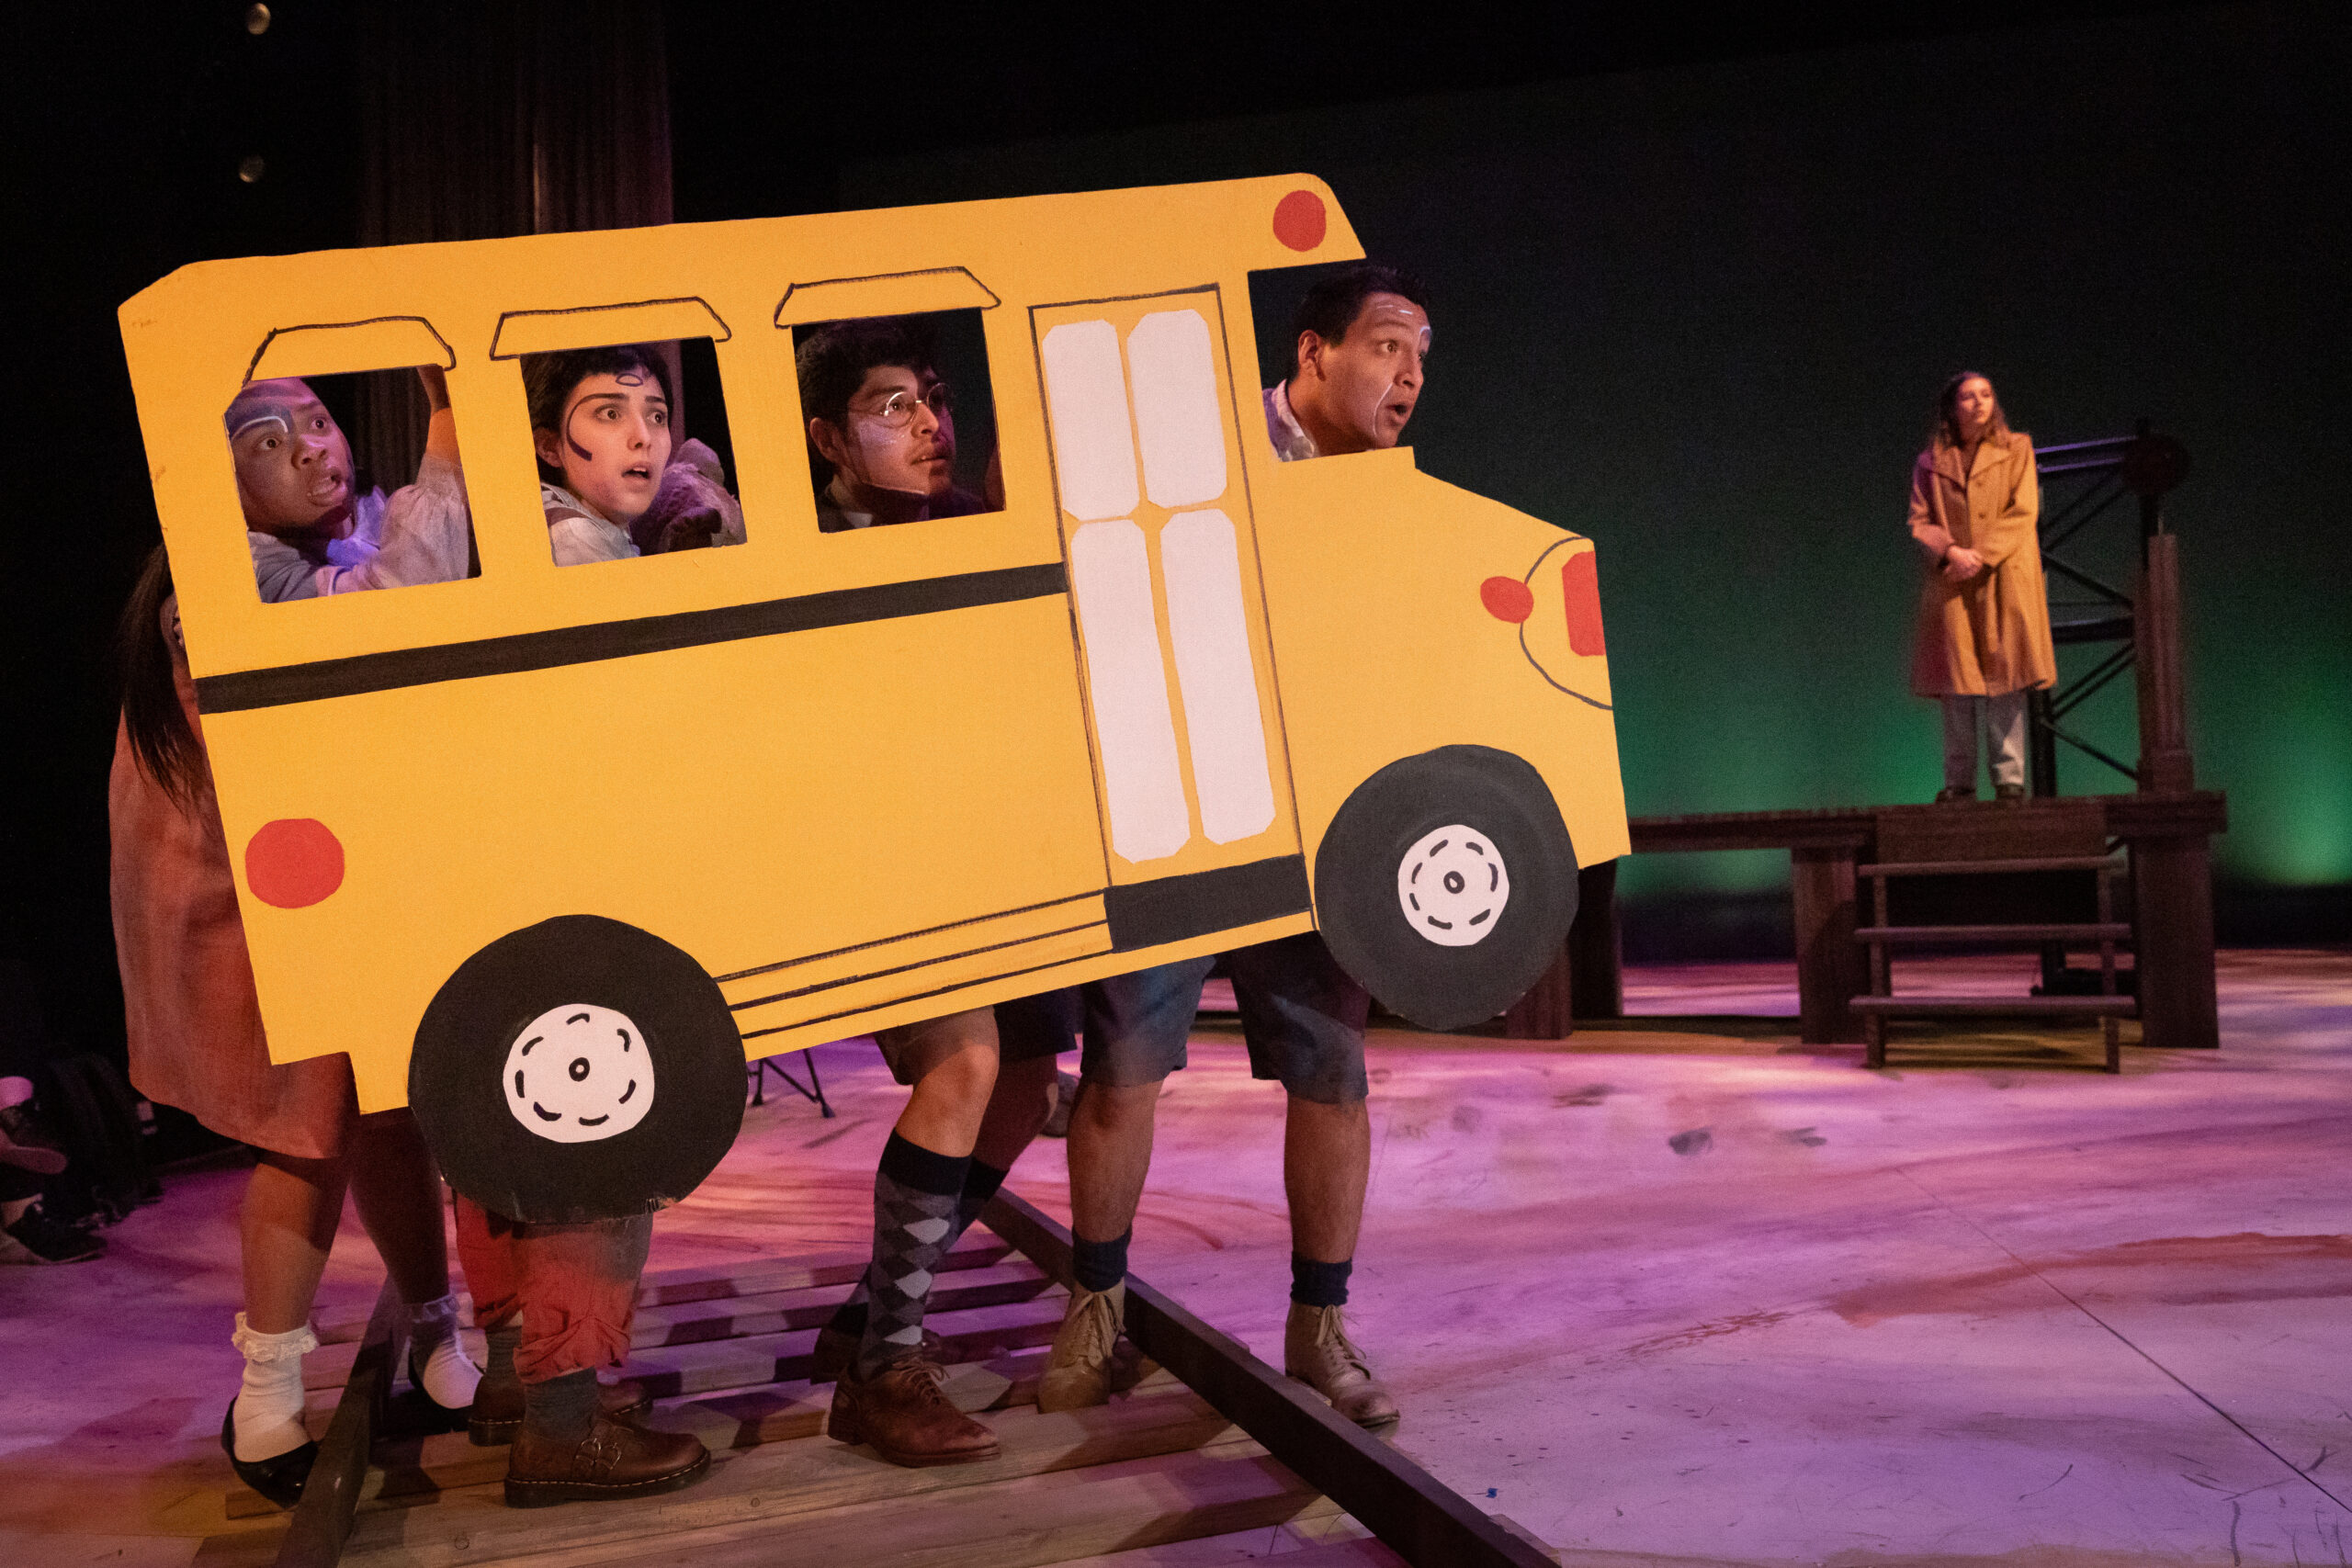 four actors portraying "ghost children" peer out of the windows of a paper school bus